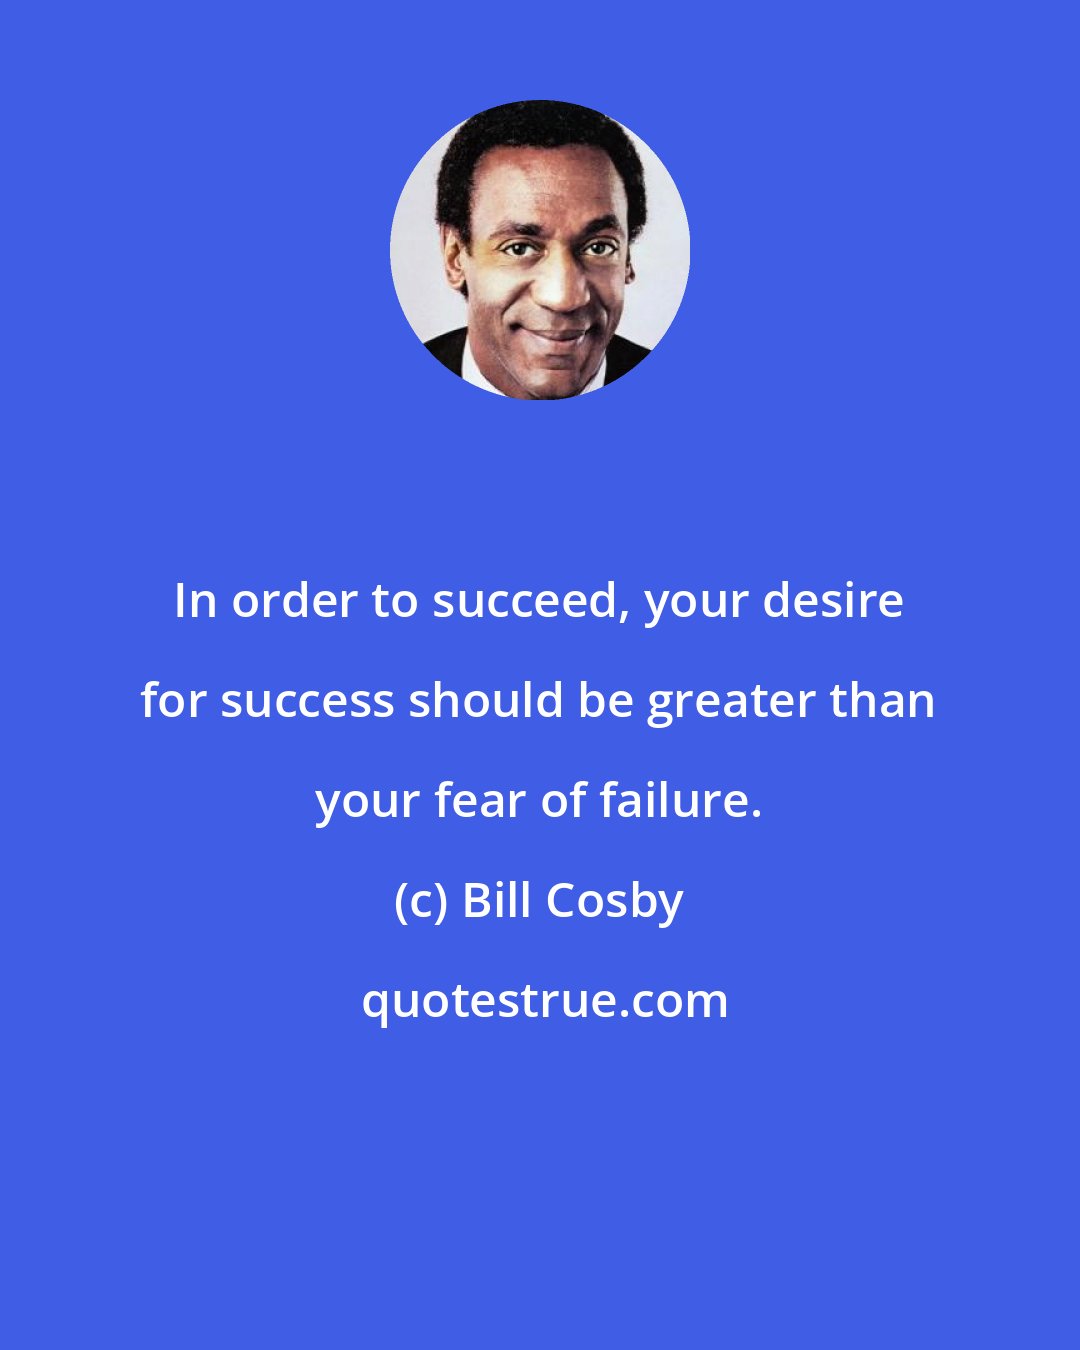 Bill Cosby: In order to succeed, your desire for success should be greater than your fear of failure.